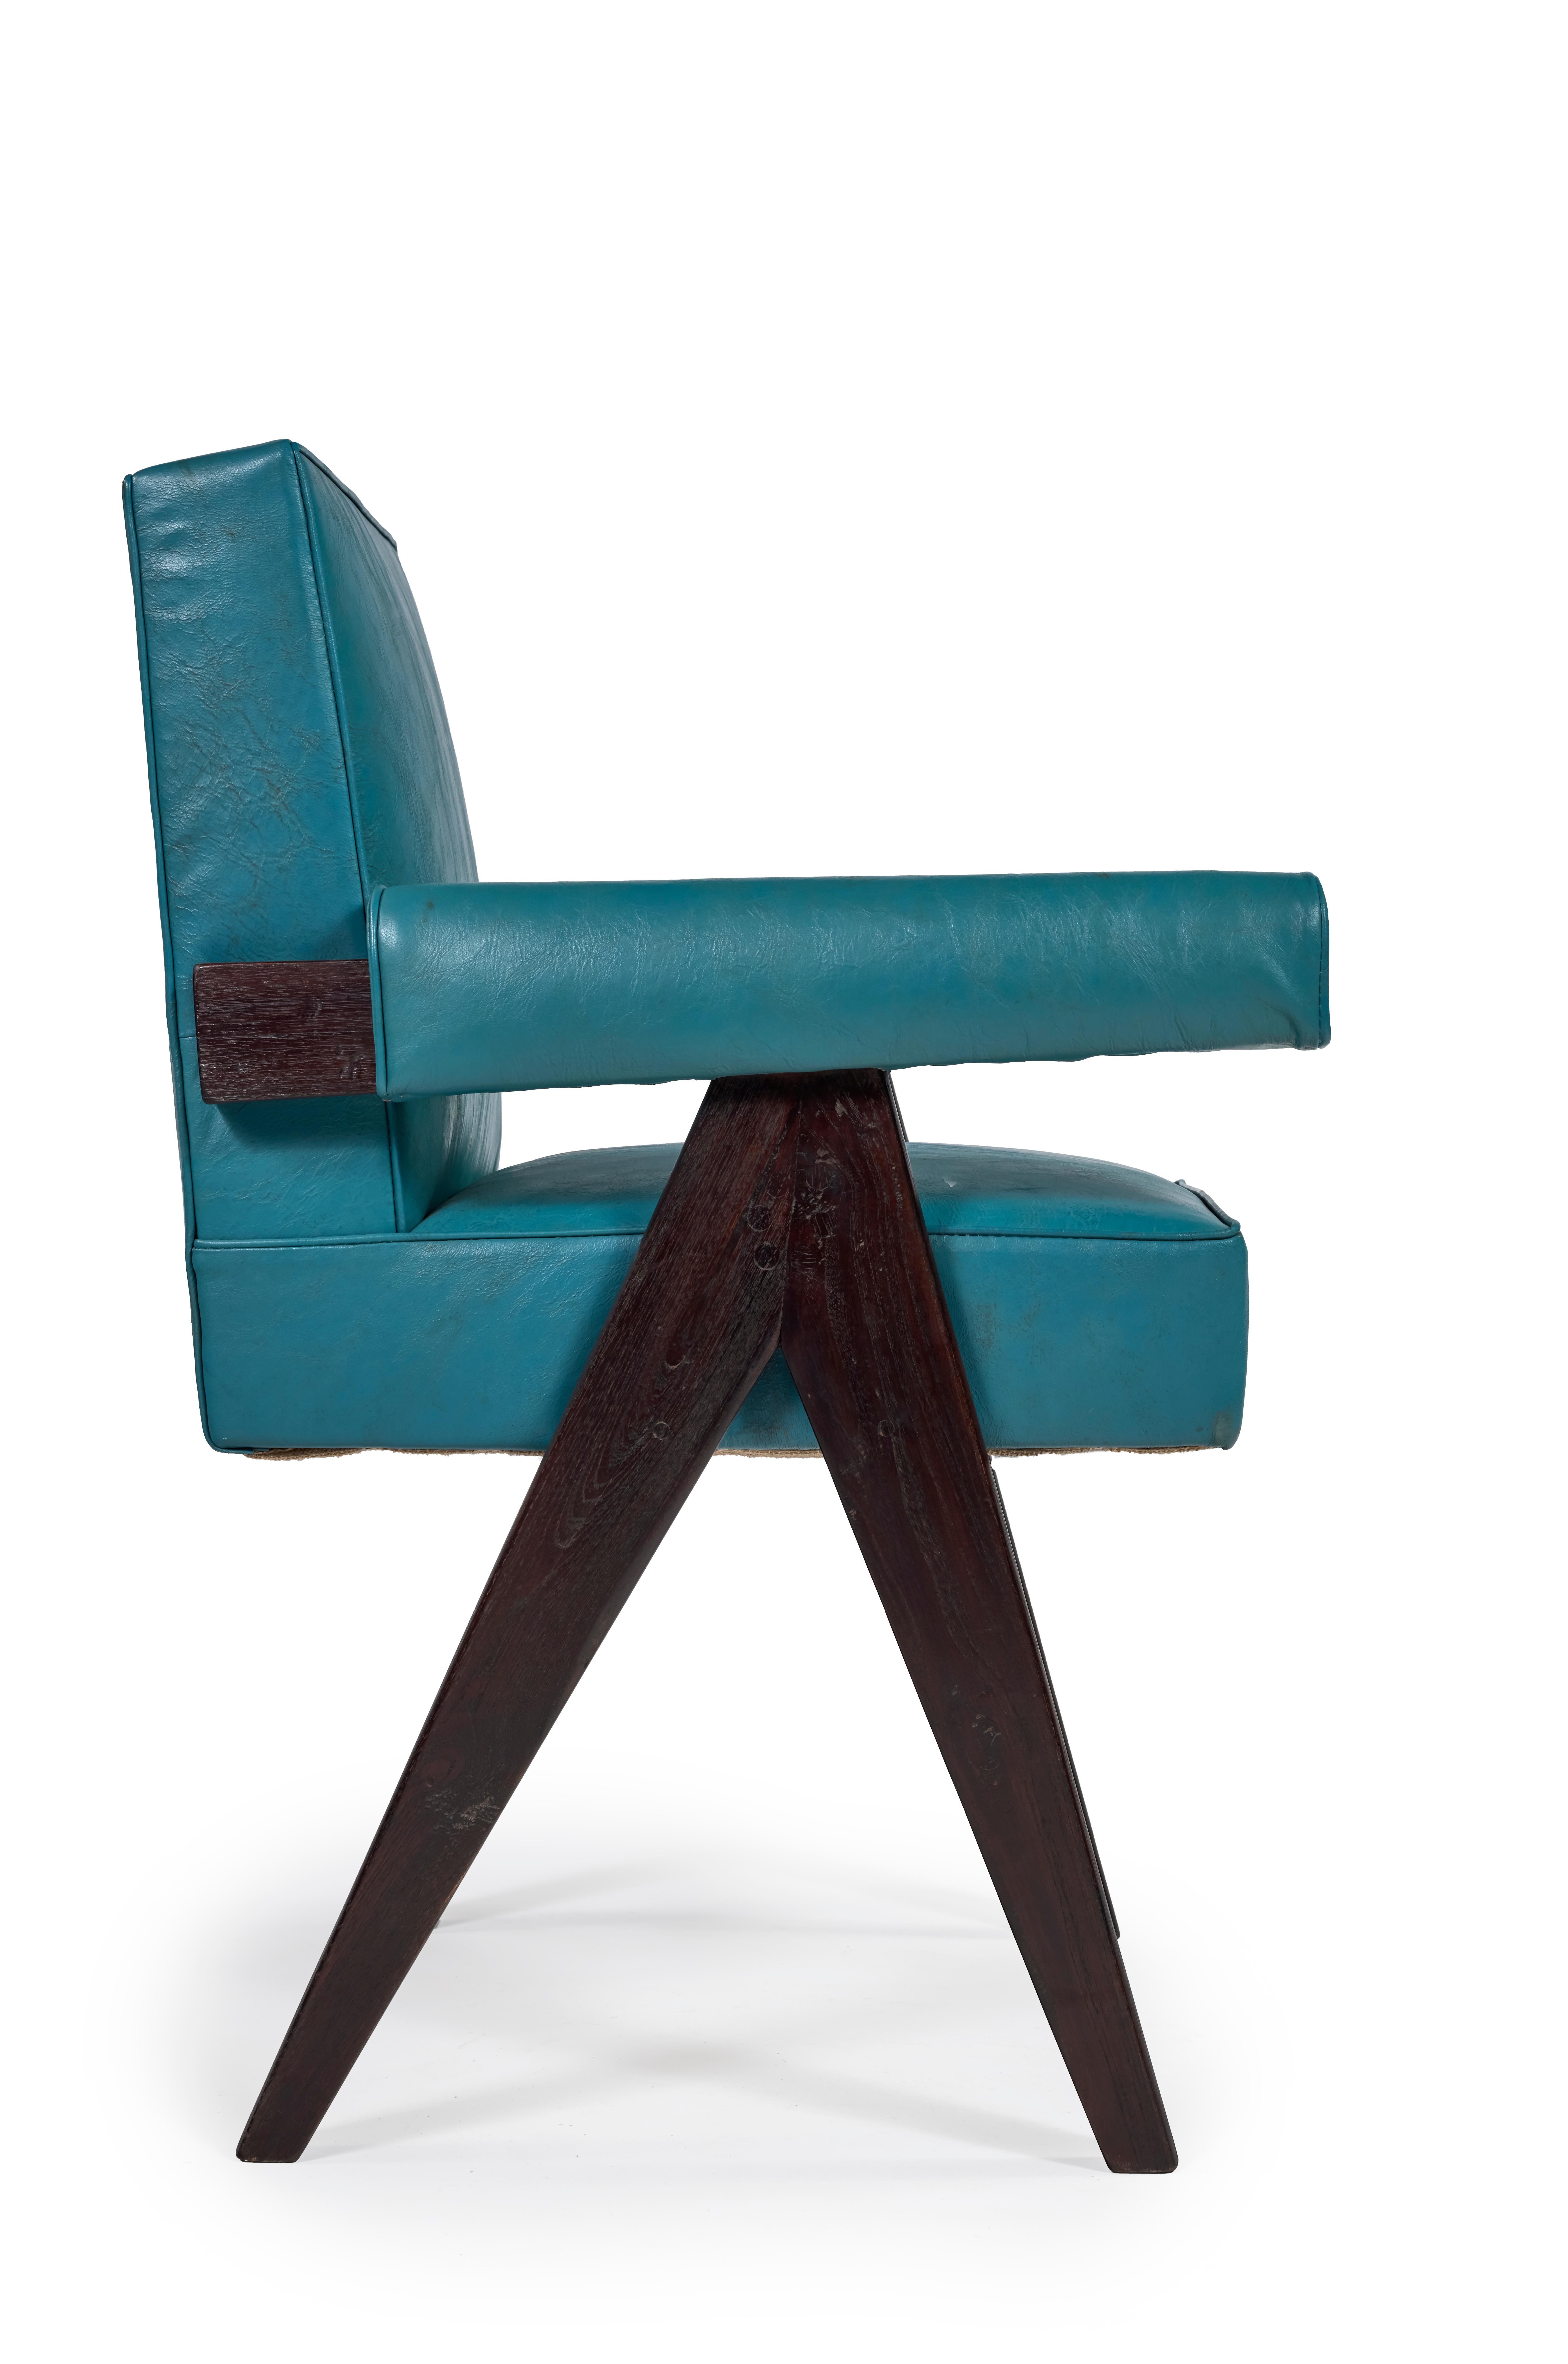 Indian Pierre Jeanneret, PJ-SI-30-C, Committee Armchair, Chandigarh, circa 1955 For Sale